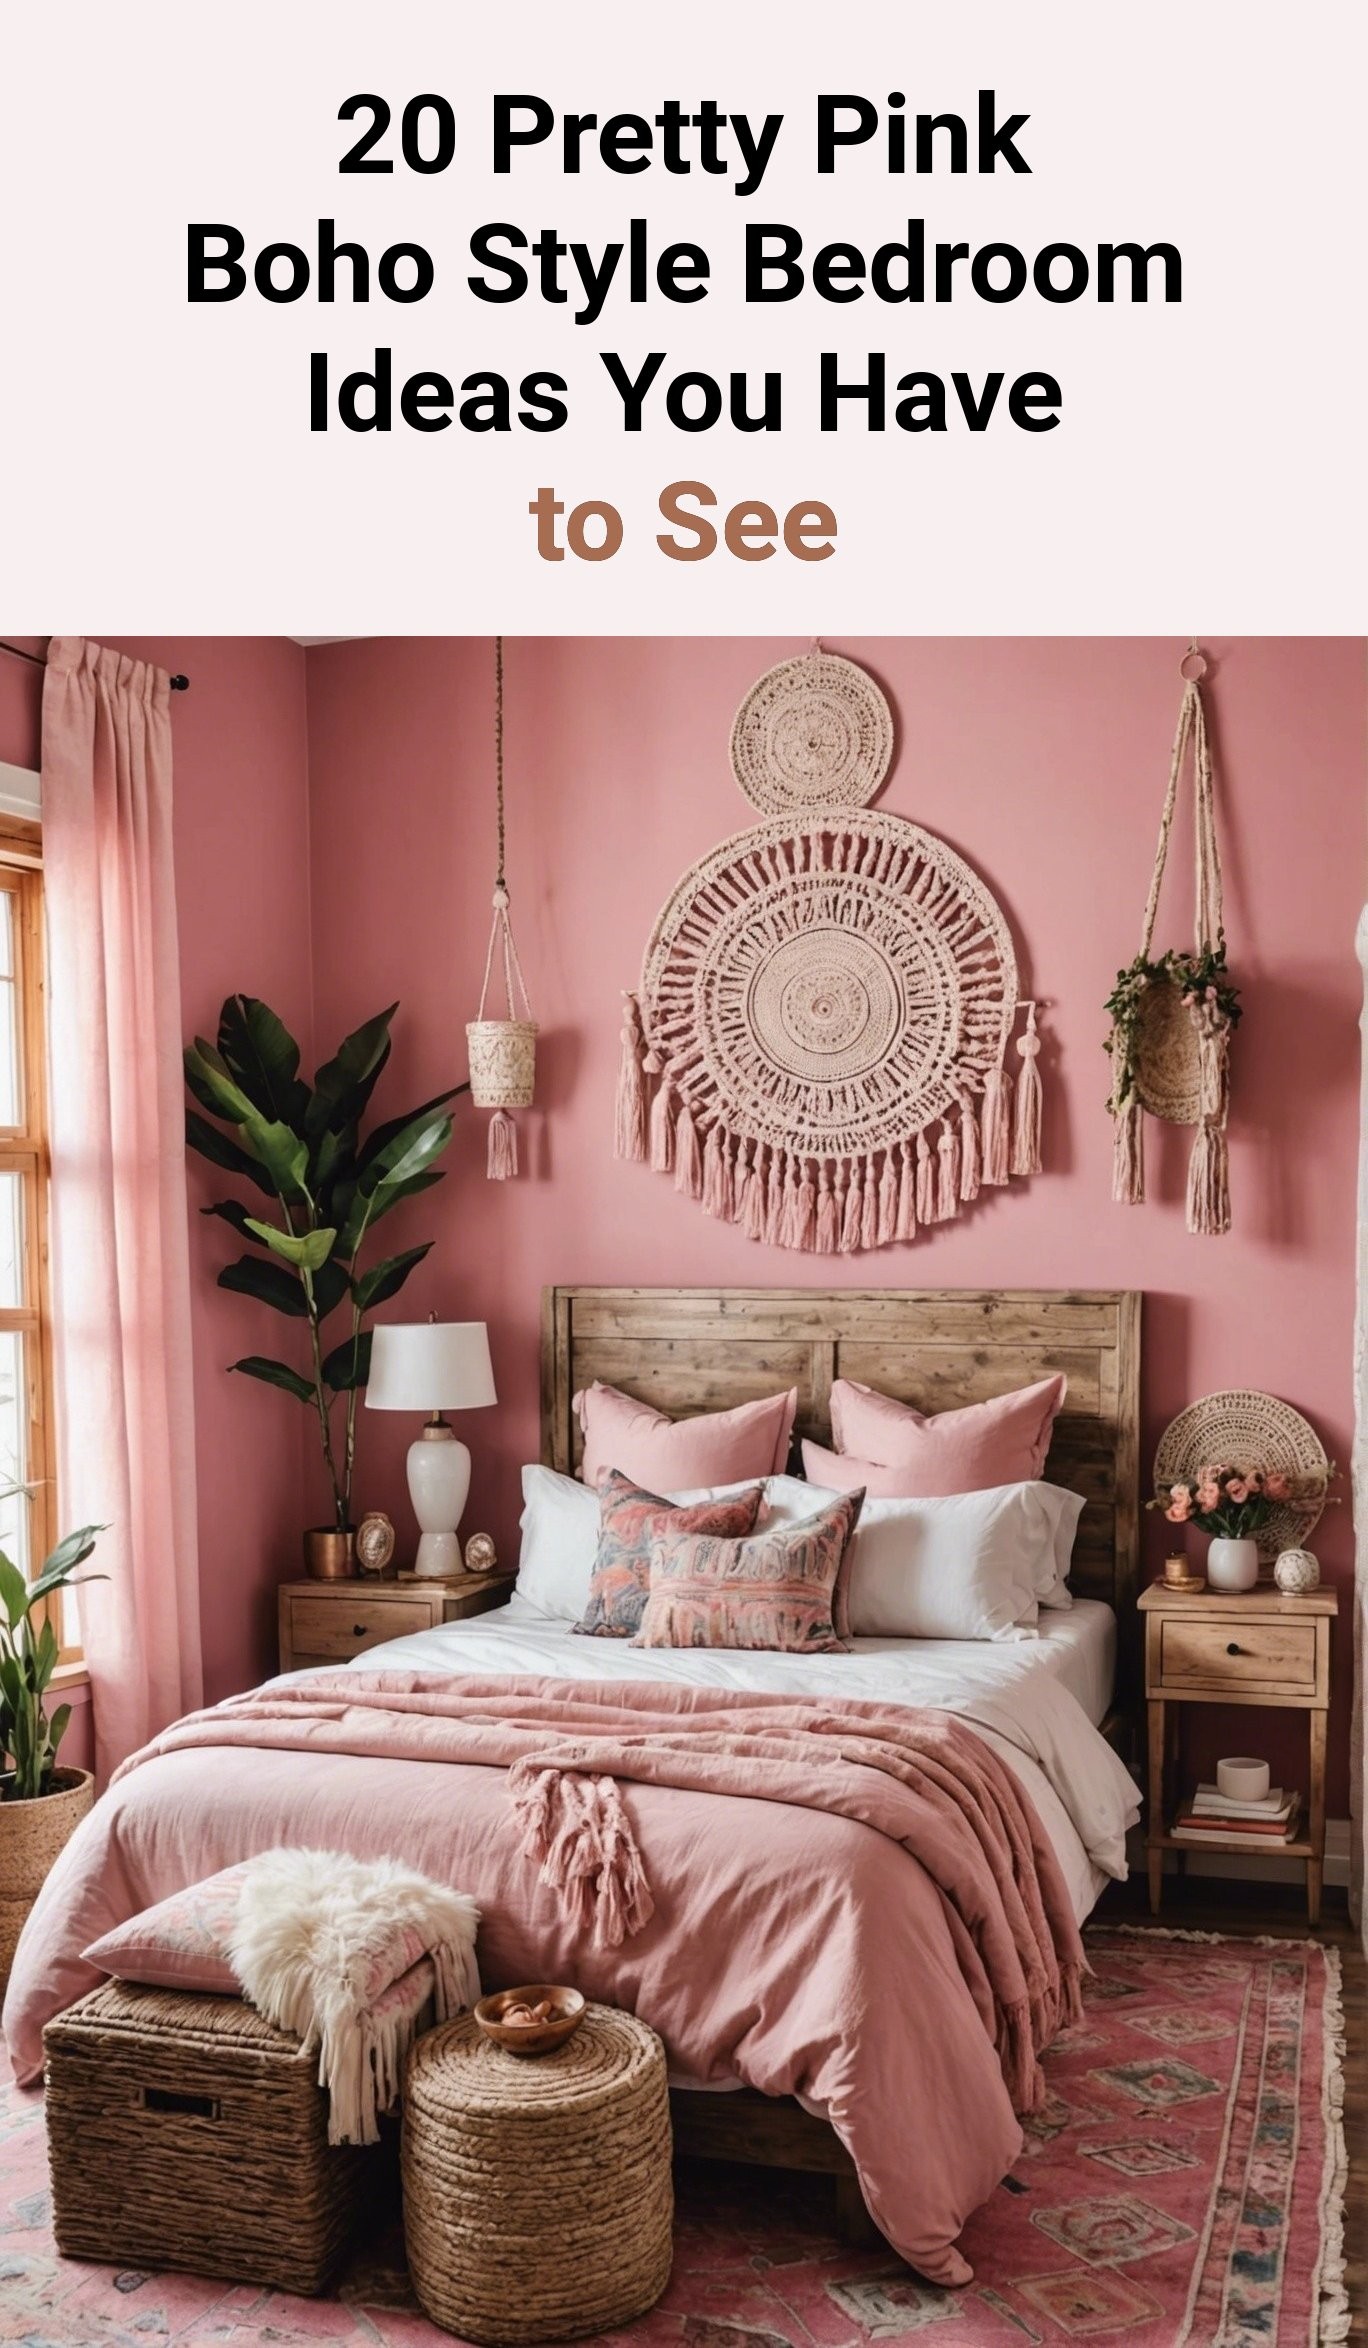 20 Pretty Pink Boho Style Bedroom Ideas You Have to See